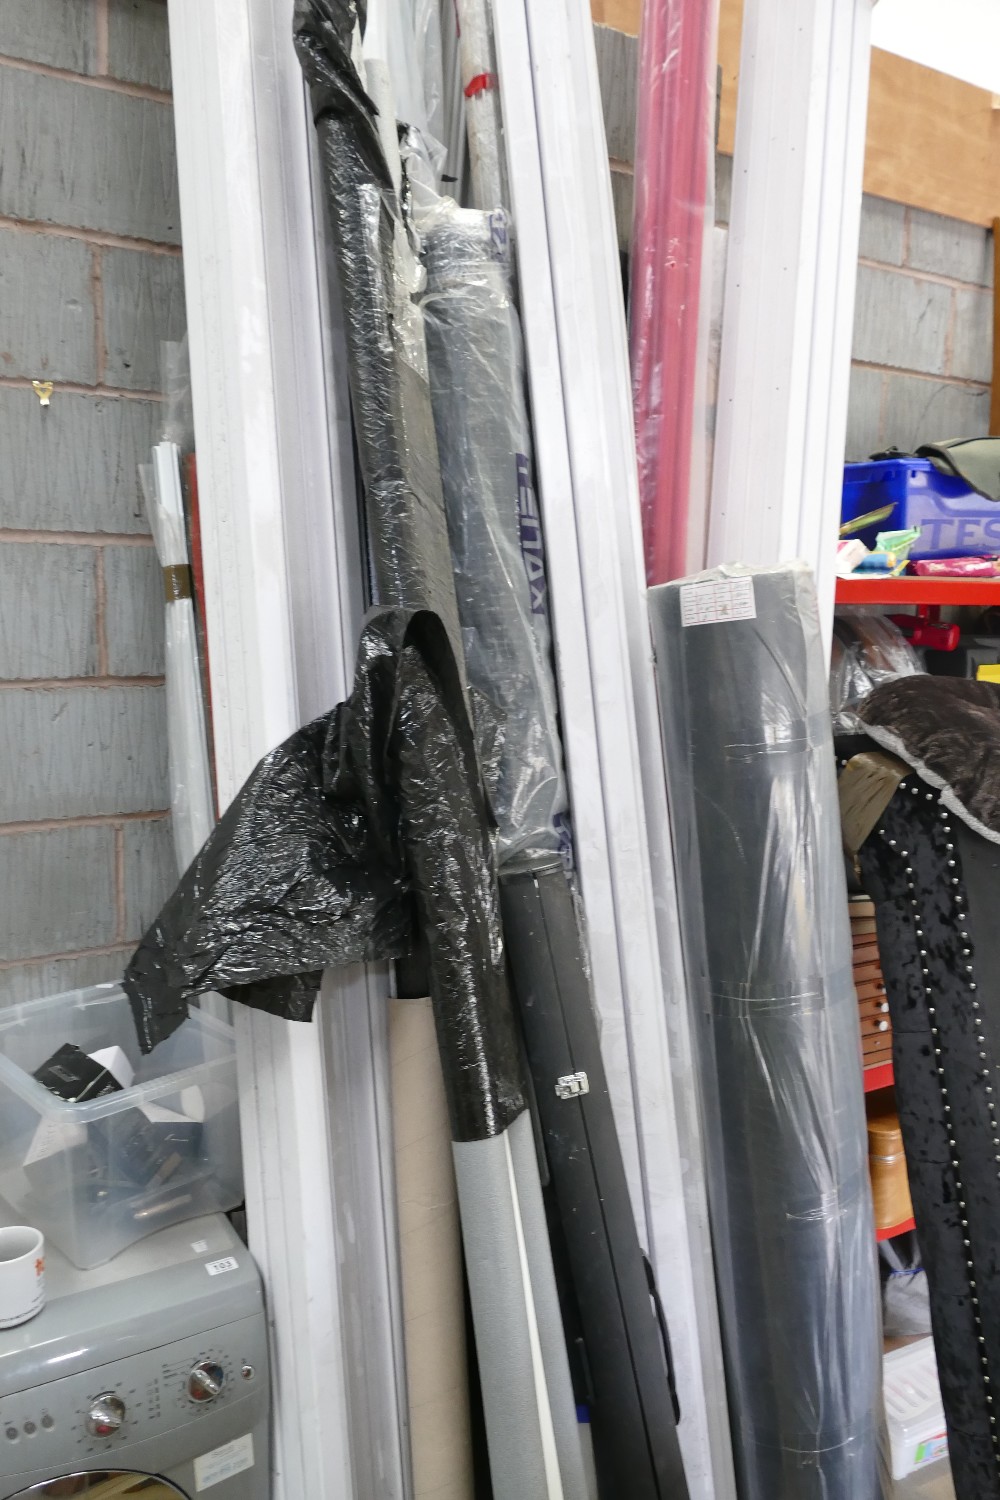 A large selection of lengthy items to include metal poles, plastic electrical skirting,